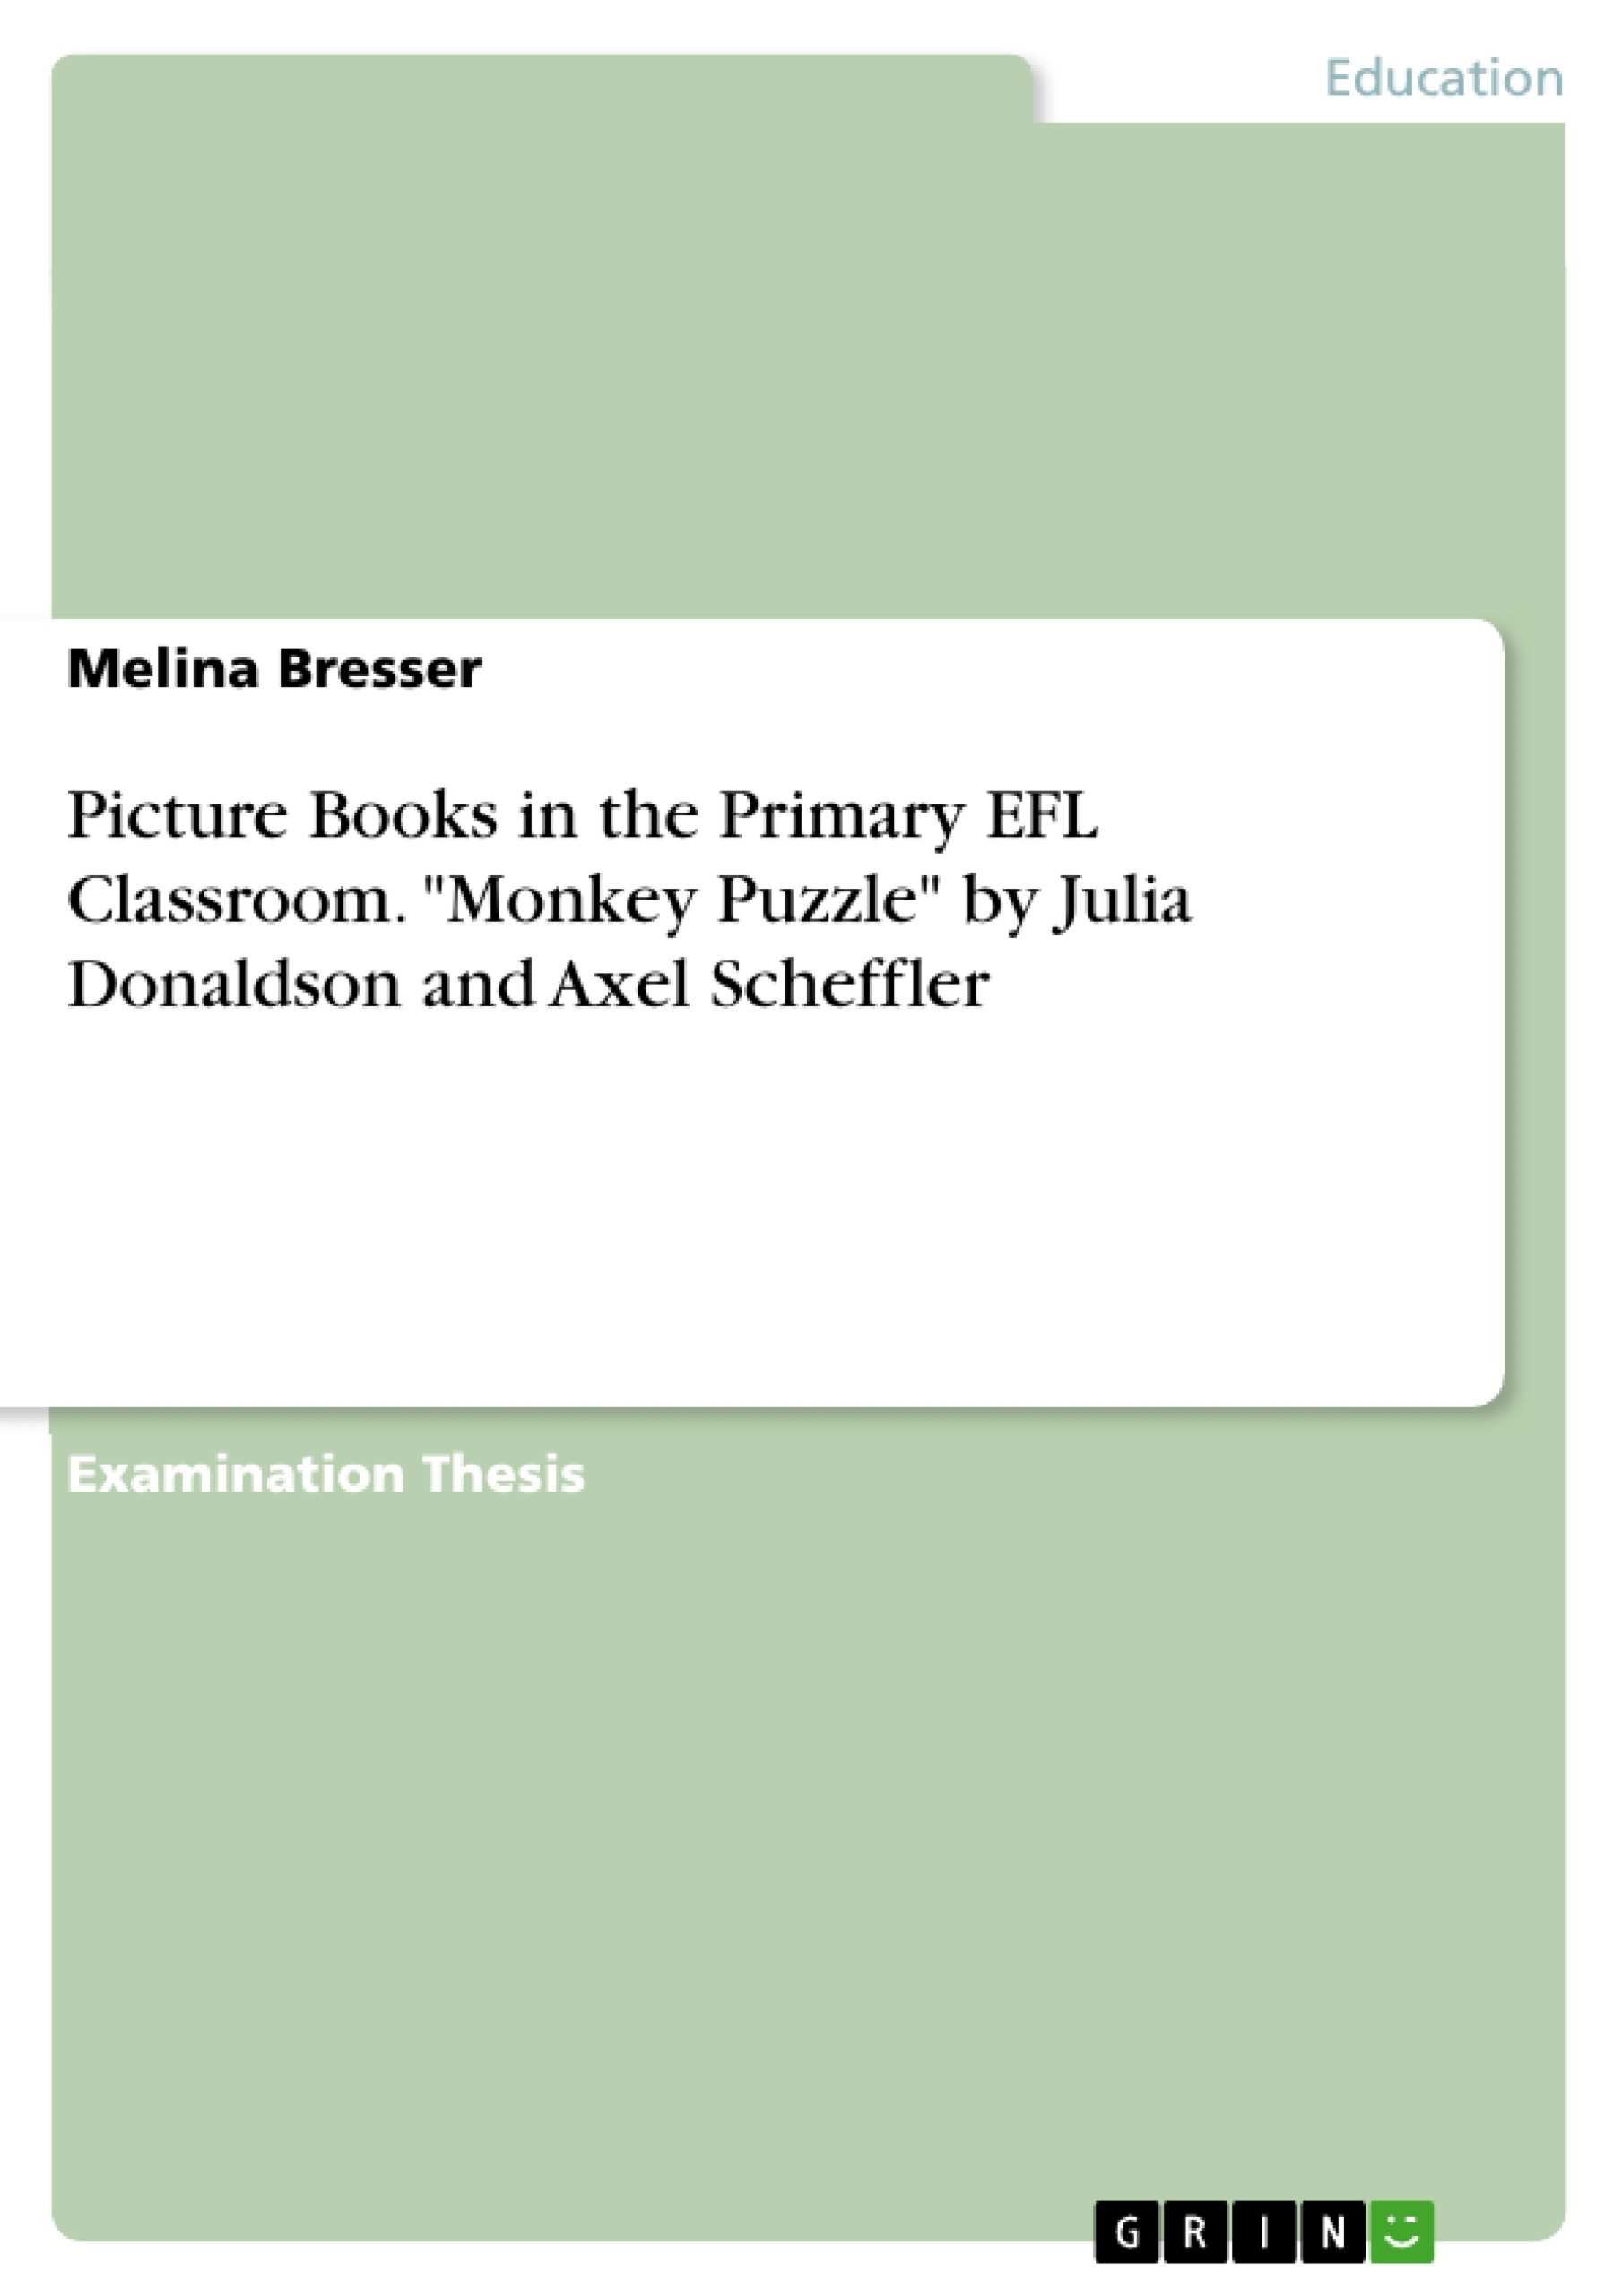 Title: Picture Books in the Primary EFL Classroom. "Monkey Puzzle" by Julia Donaldson and Axel Scheffler